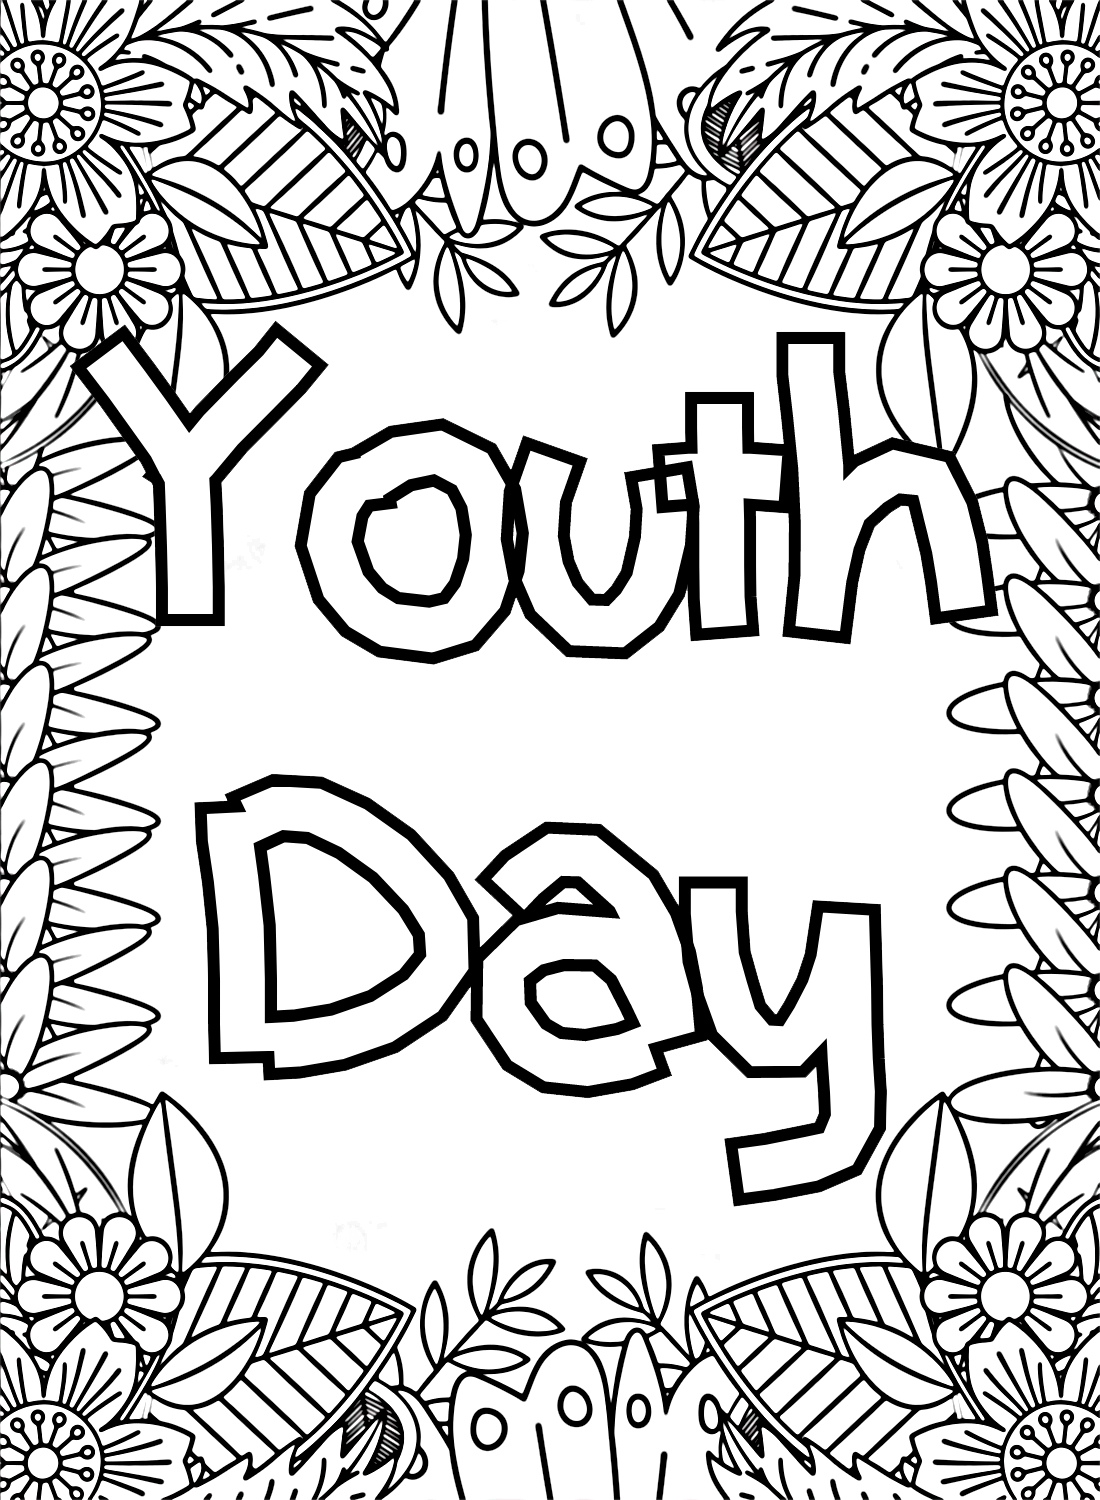 International Youth Day Picture to Color from International Youth Day